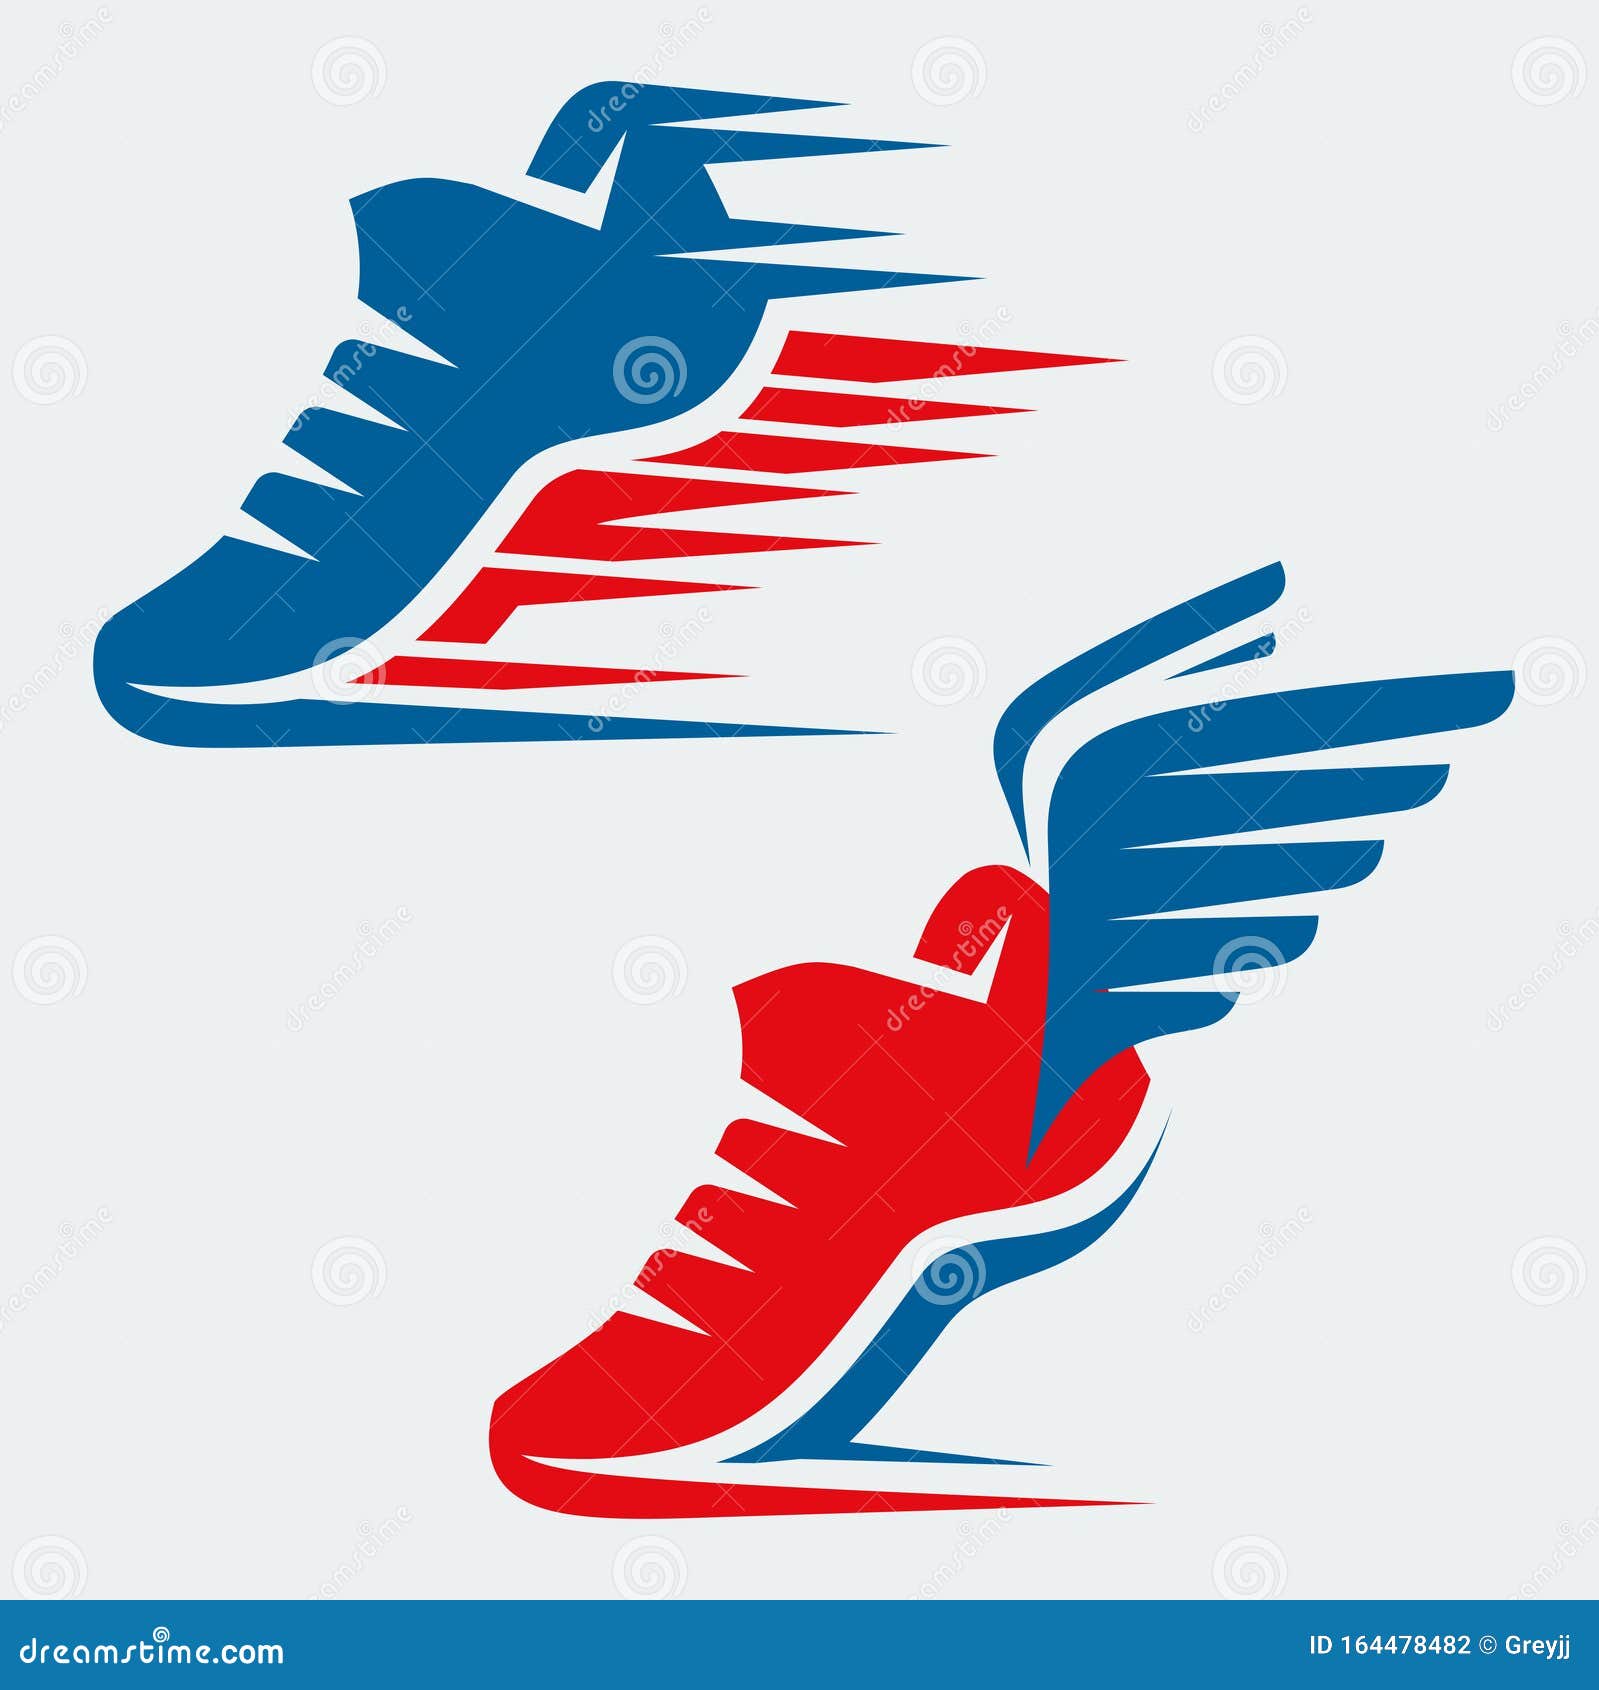 running shoes with speed and motion trails and with wings